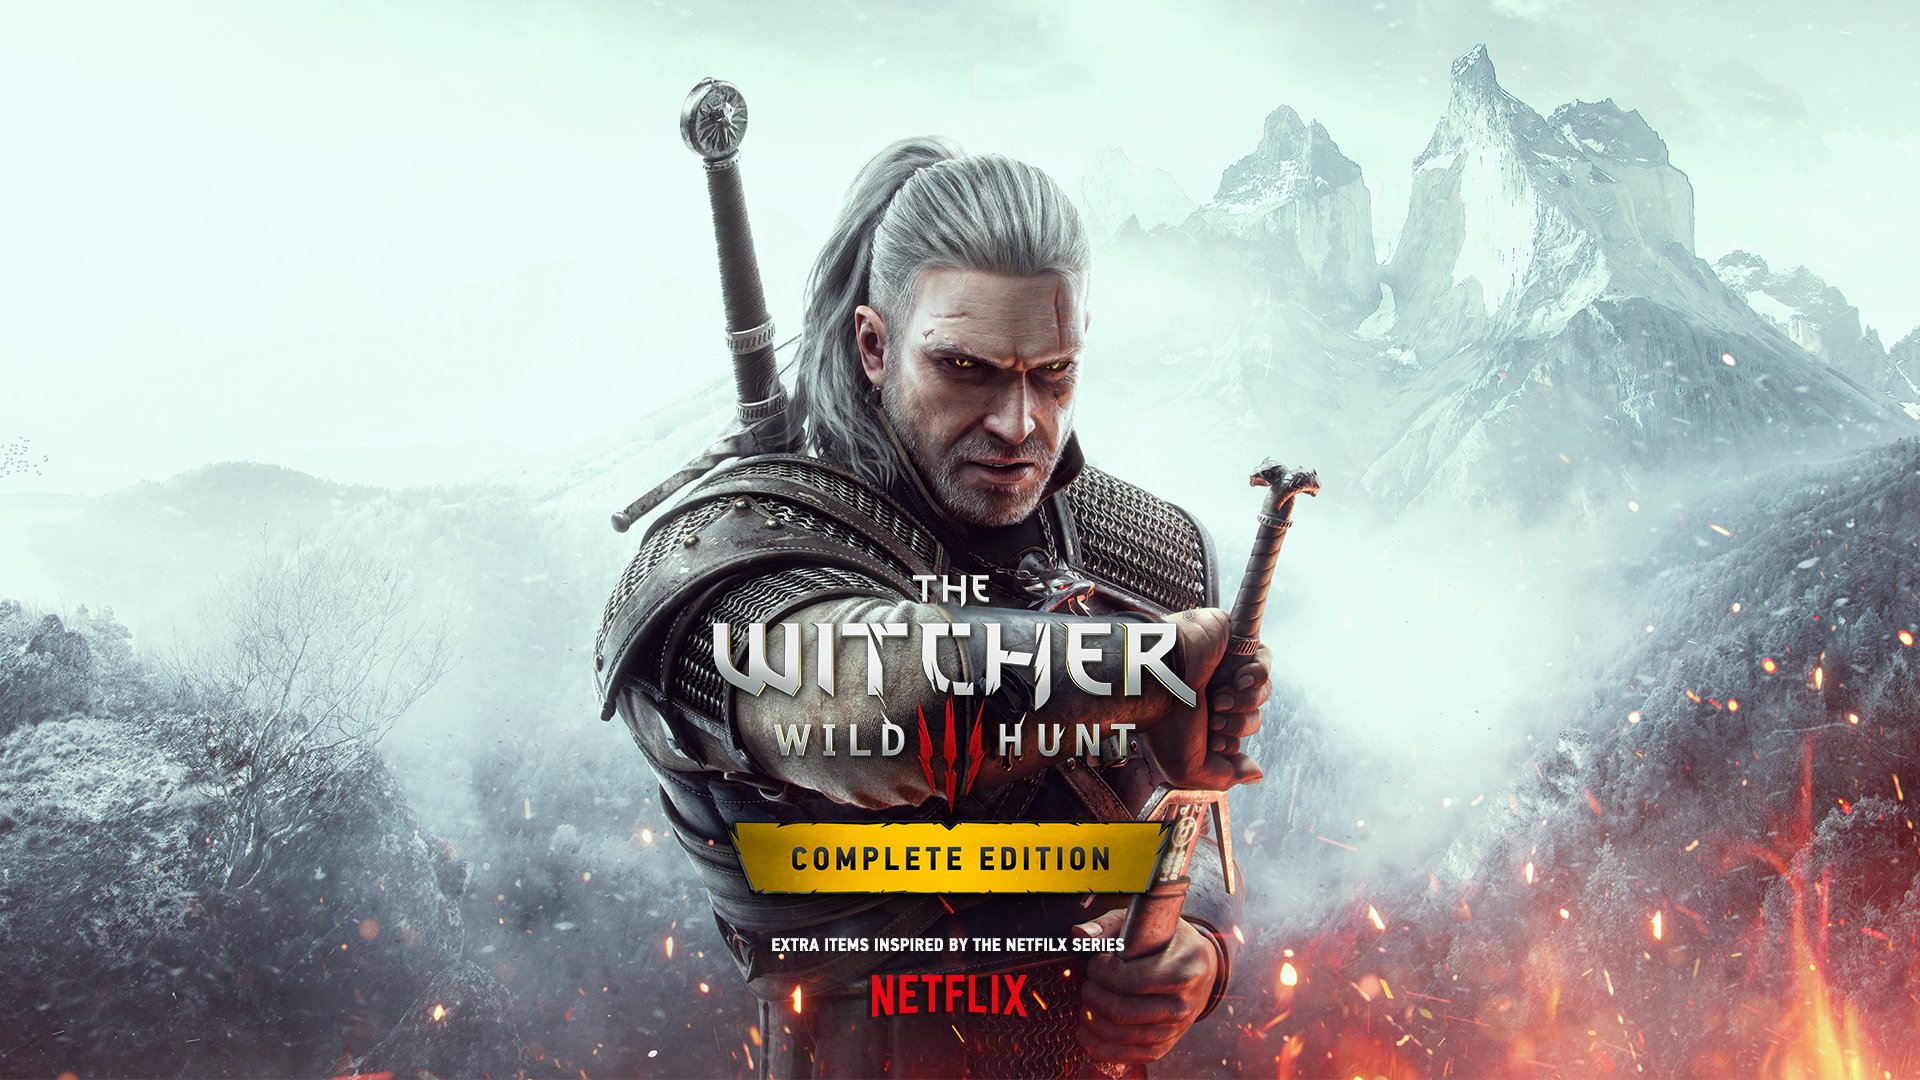 The Witcher 3: Wild Hunt Complete Edition for Xbox Series X|S and PS5 will Include Netflix-Show Inspired DLC